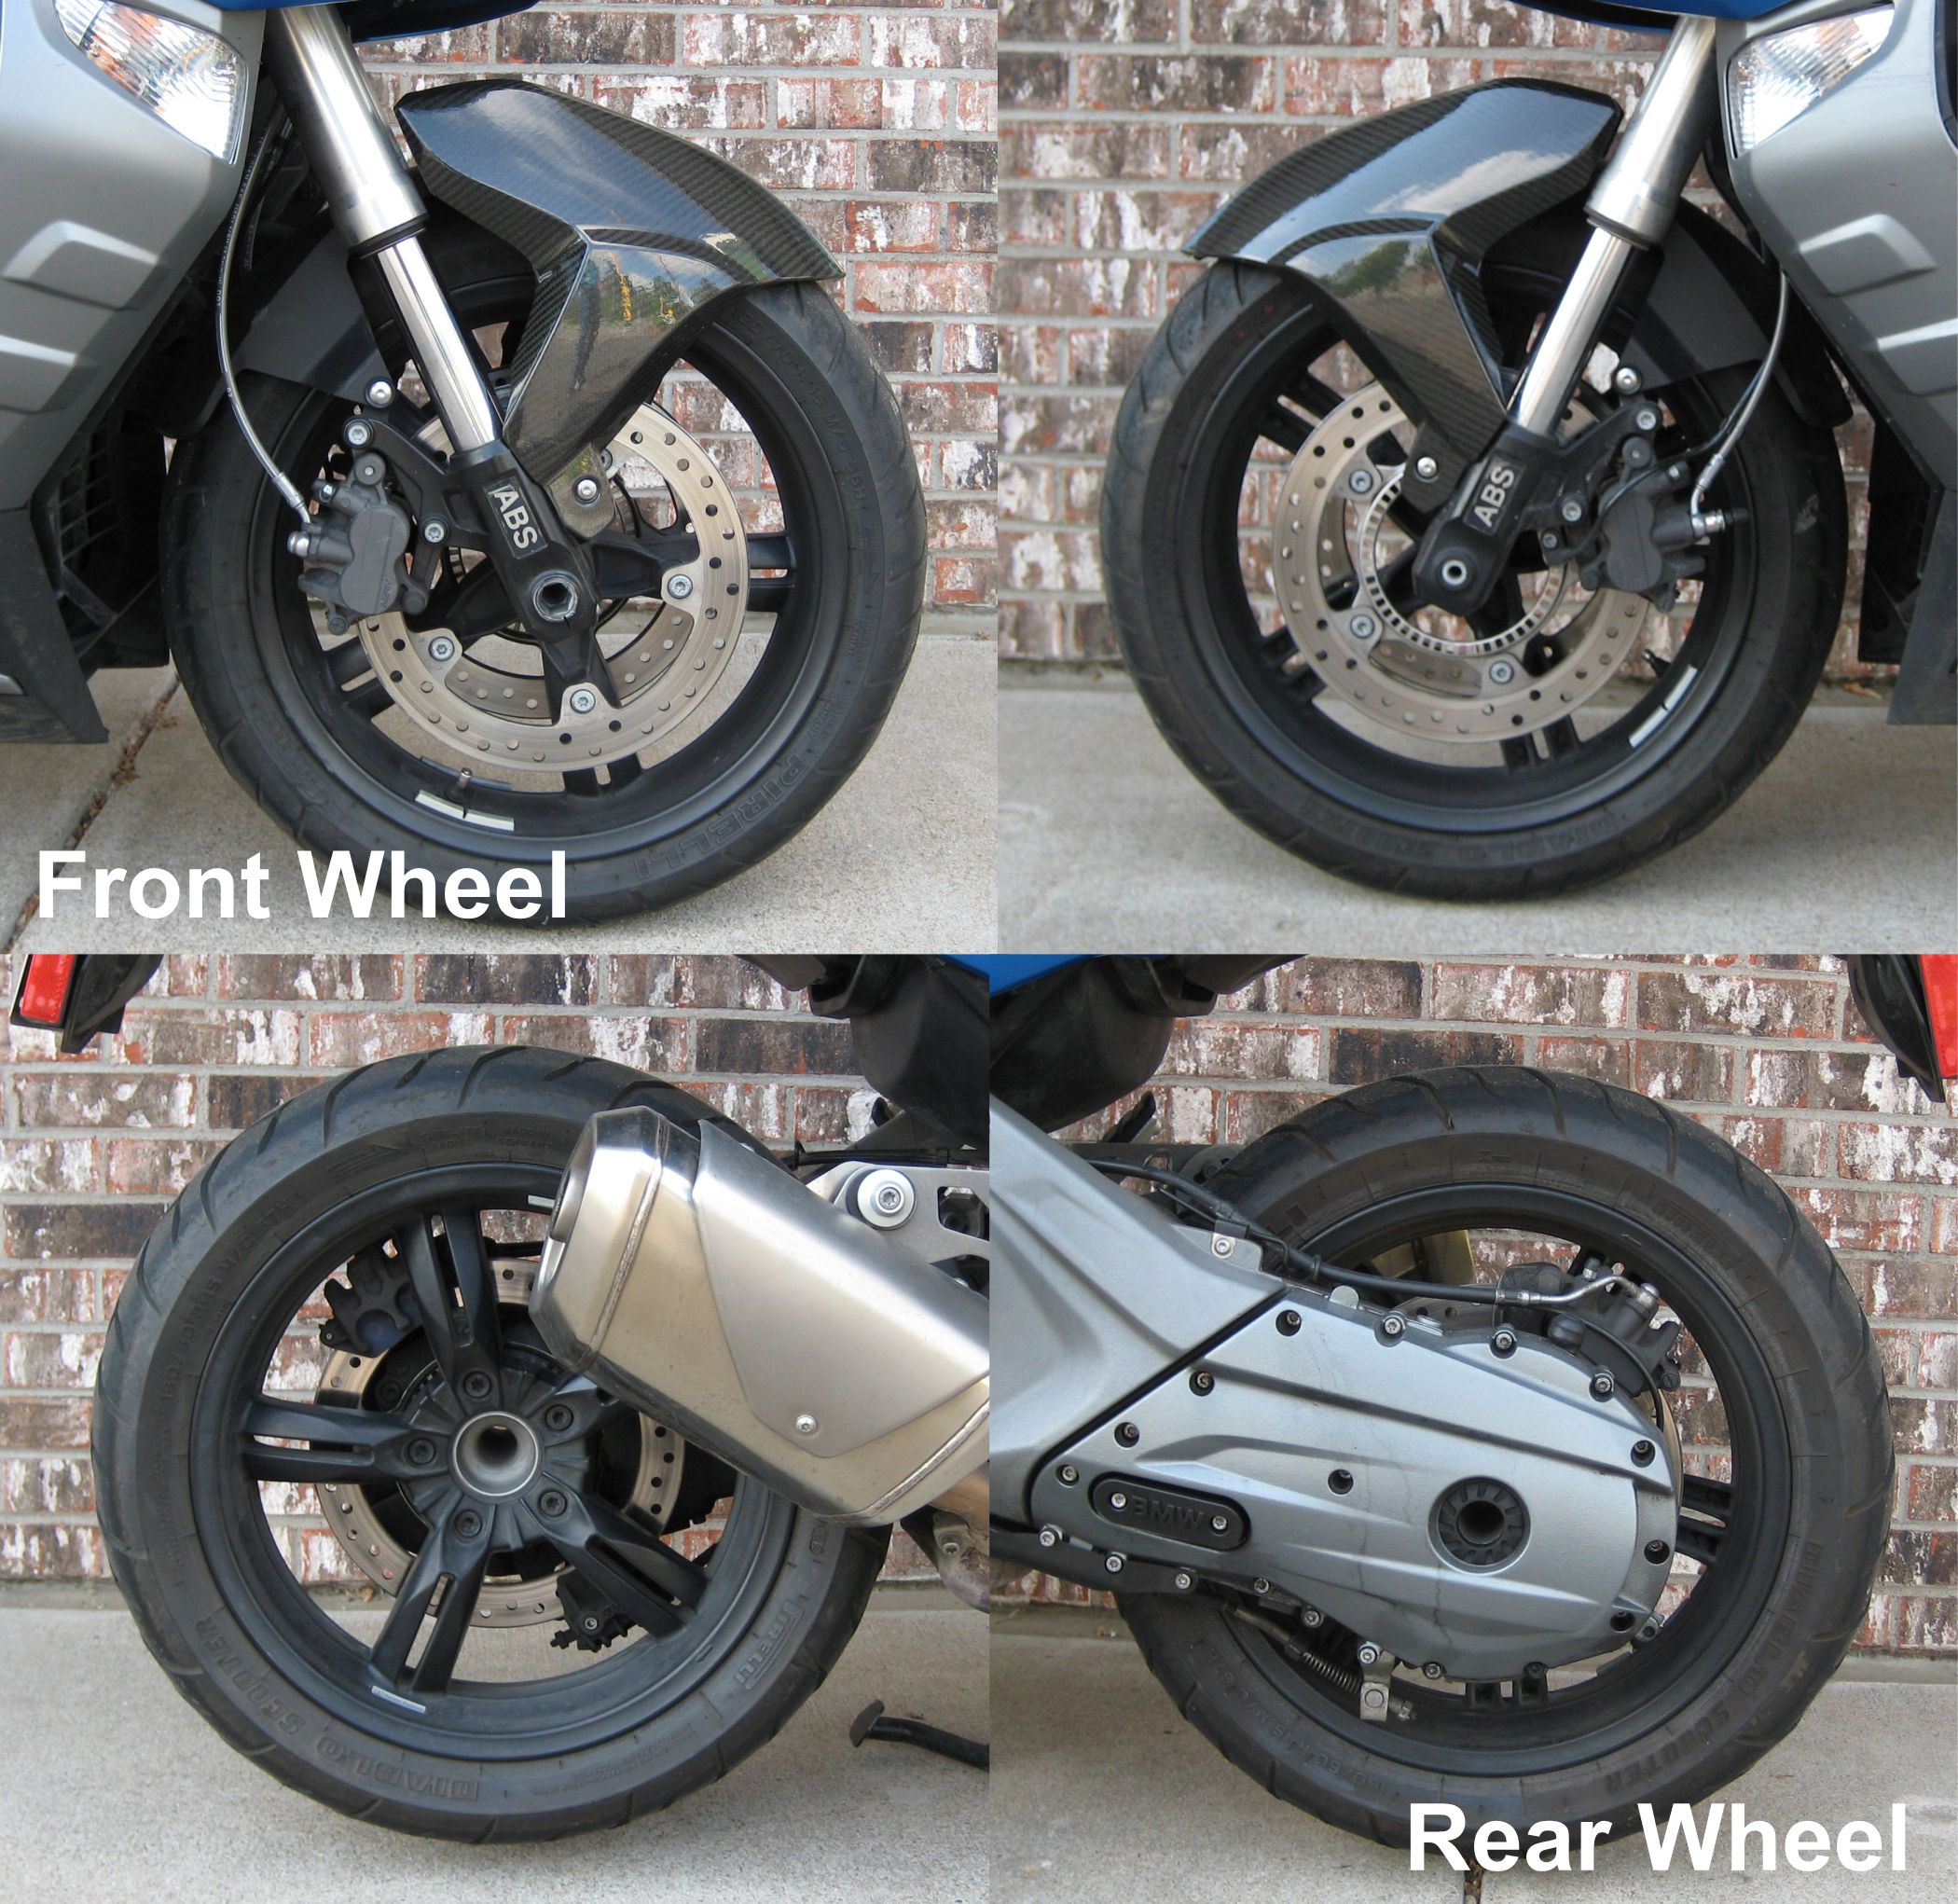 Front and Rear wheel of BMW C600 Sport